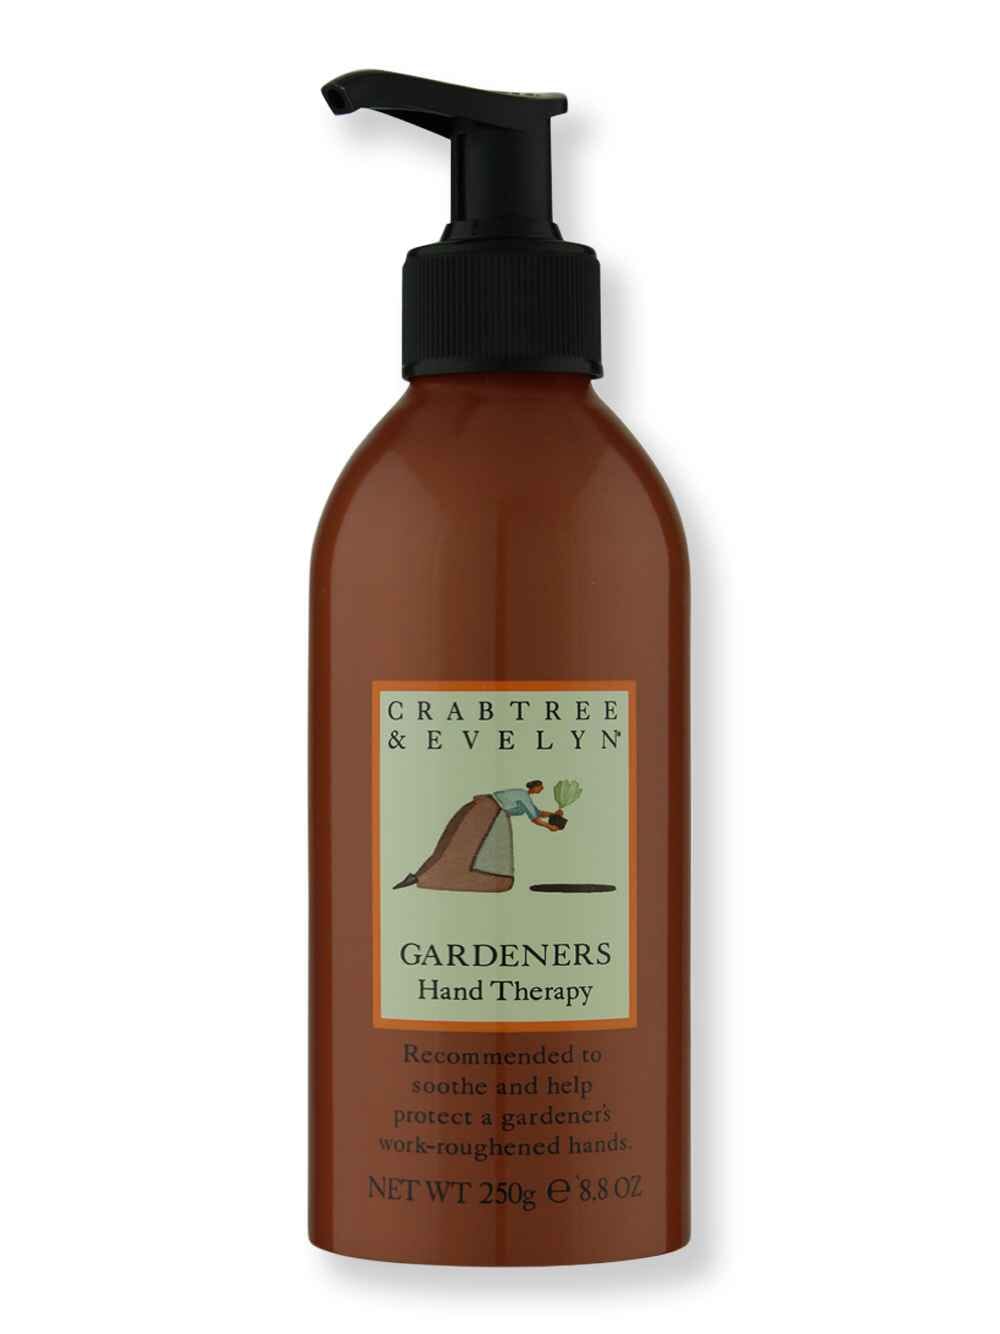 Crabtree & Evelyn Crabtree & Evelyn Gardeners Hand Therapy 250 g Hand Creams & Lotions 